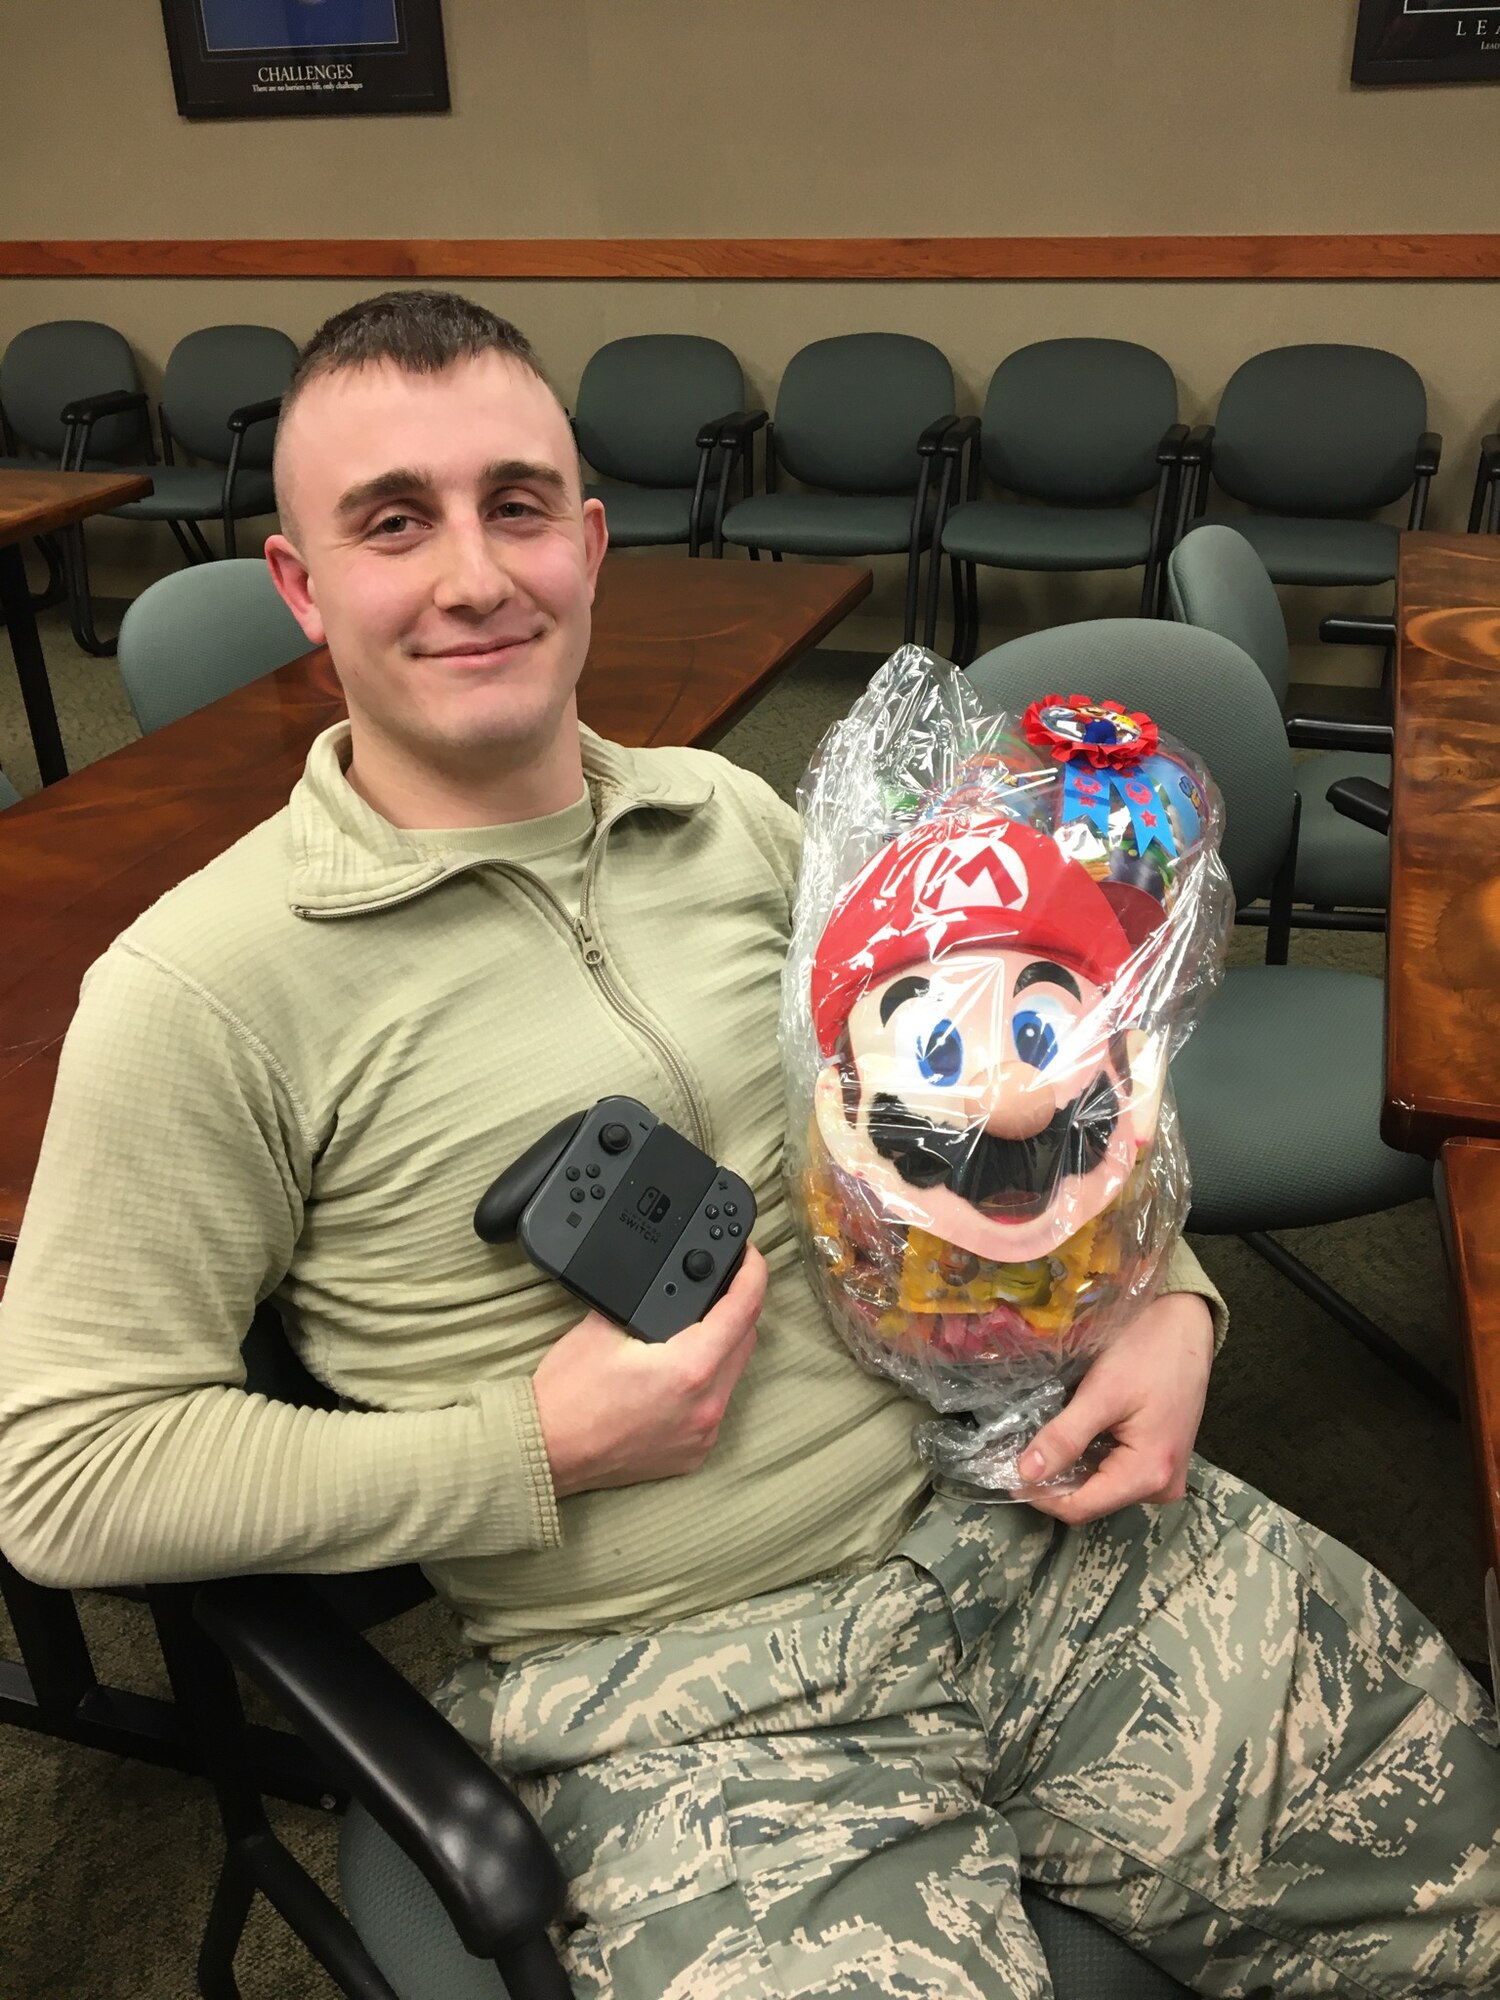 Staff Sgt. David Hannah, 434th Civil Engineering Squadron electrical systems apprentice, displays the prize he won for winning the Super Smash Bros. tournament held by Airman & Family Readiness, Feb. 8, 2020. Master Sgt. Hansel Orozco, 434th Air Refueling Wing religious affairs superintendent, organized the tournament as part of his second game night event, and the prize was provided by Master Sgt. Lisa Hendricks, 434th Aerospace Medicine Squadron medical service technician.